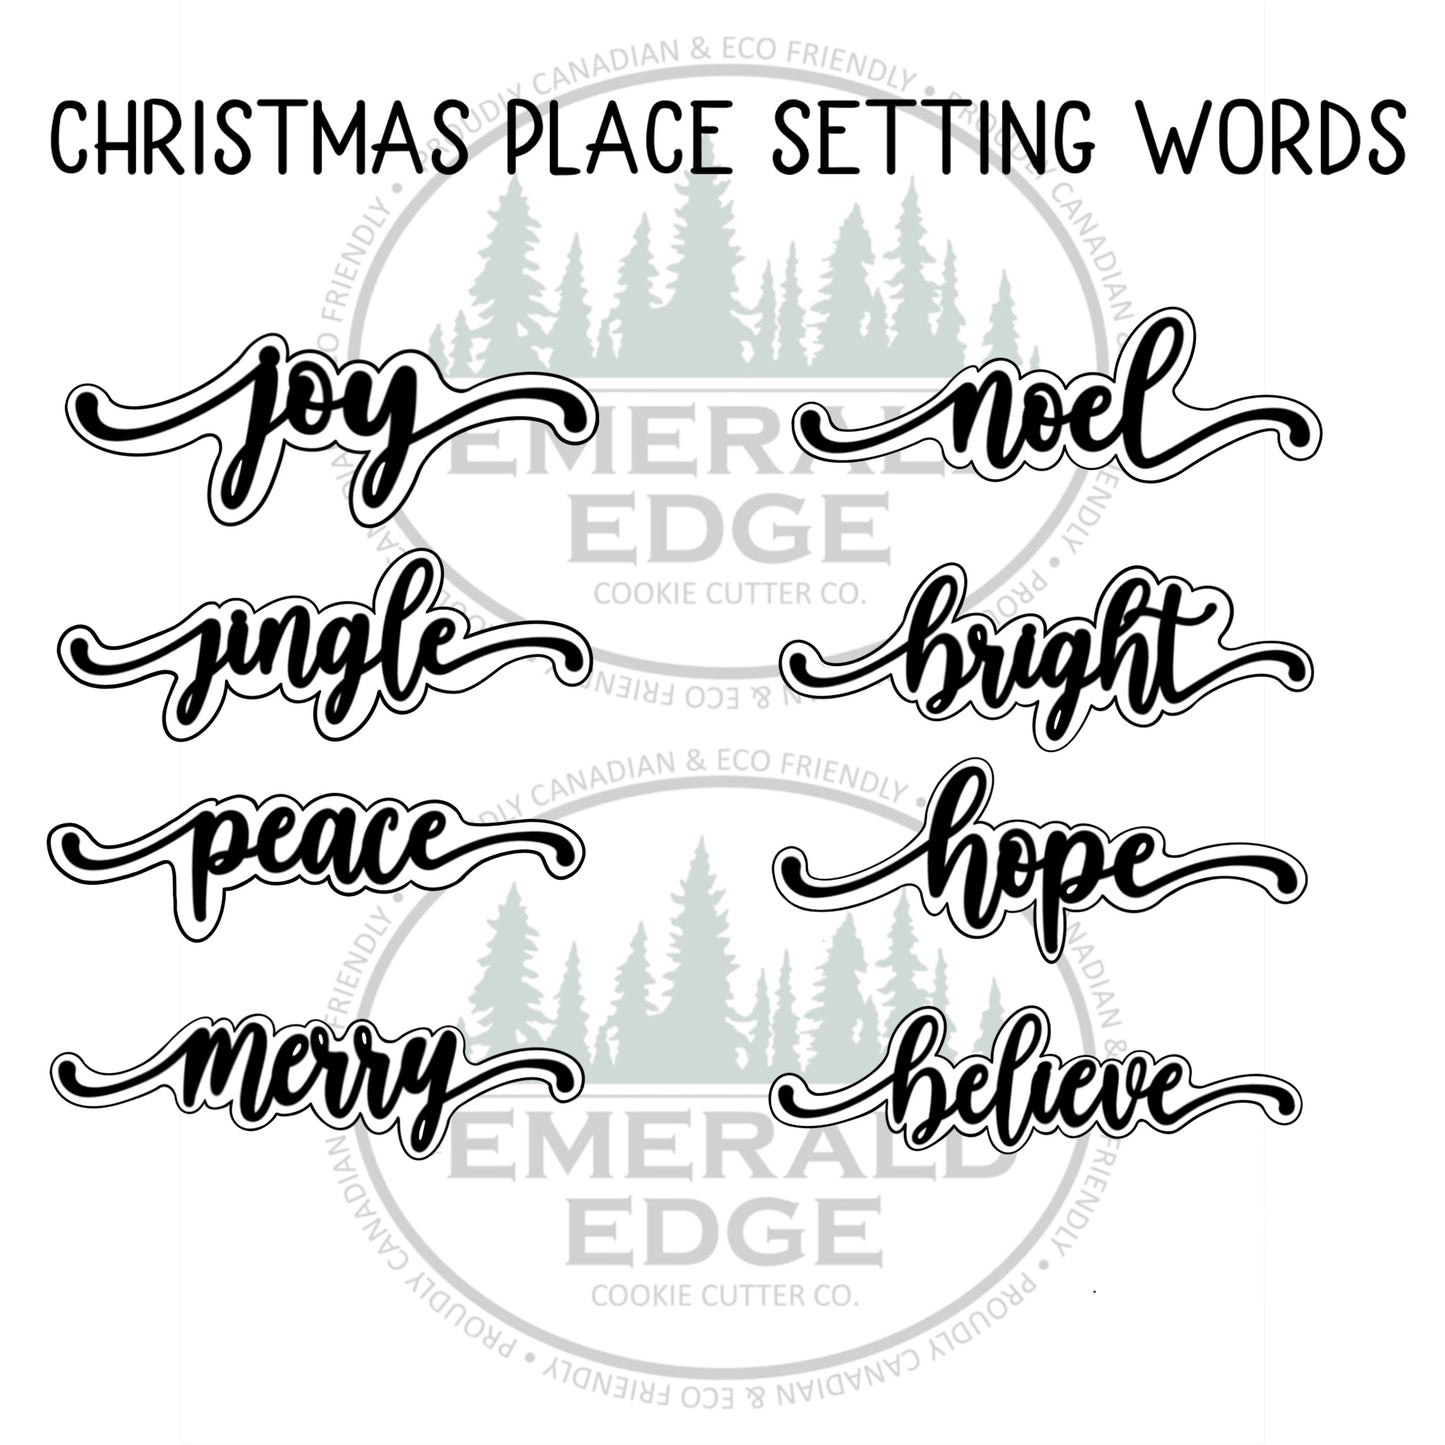 Christmas Place Setting Words